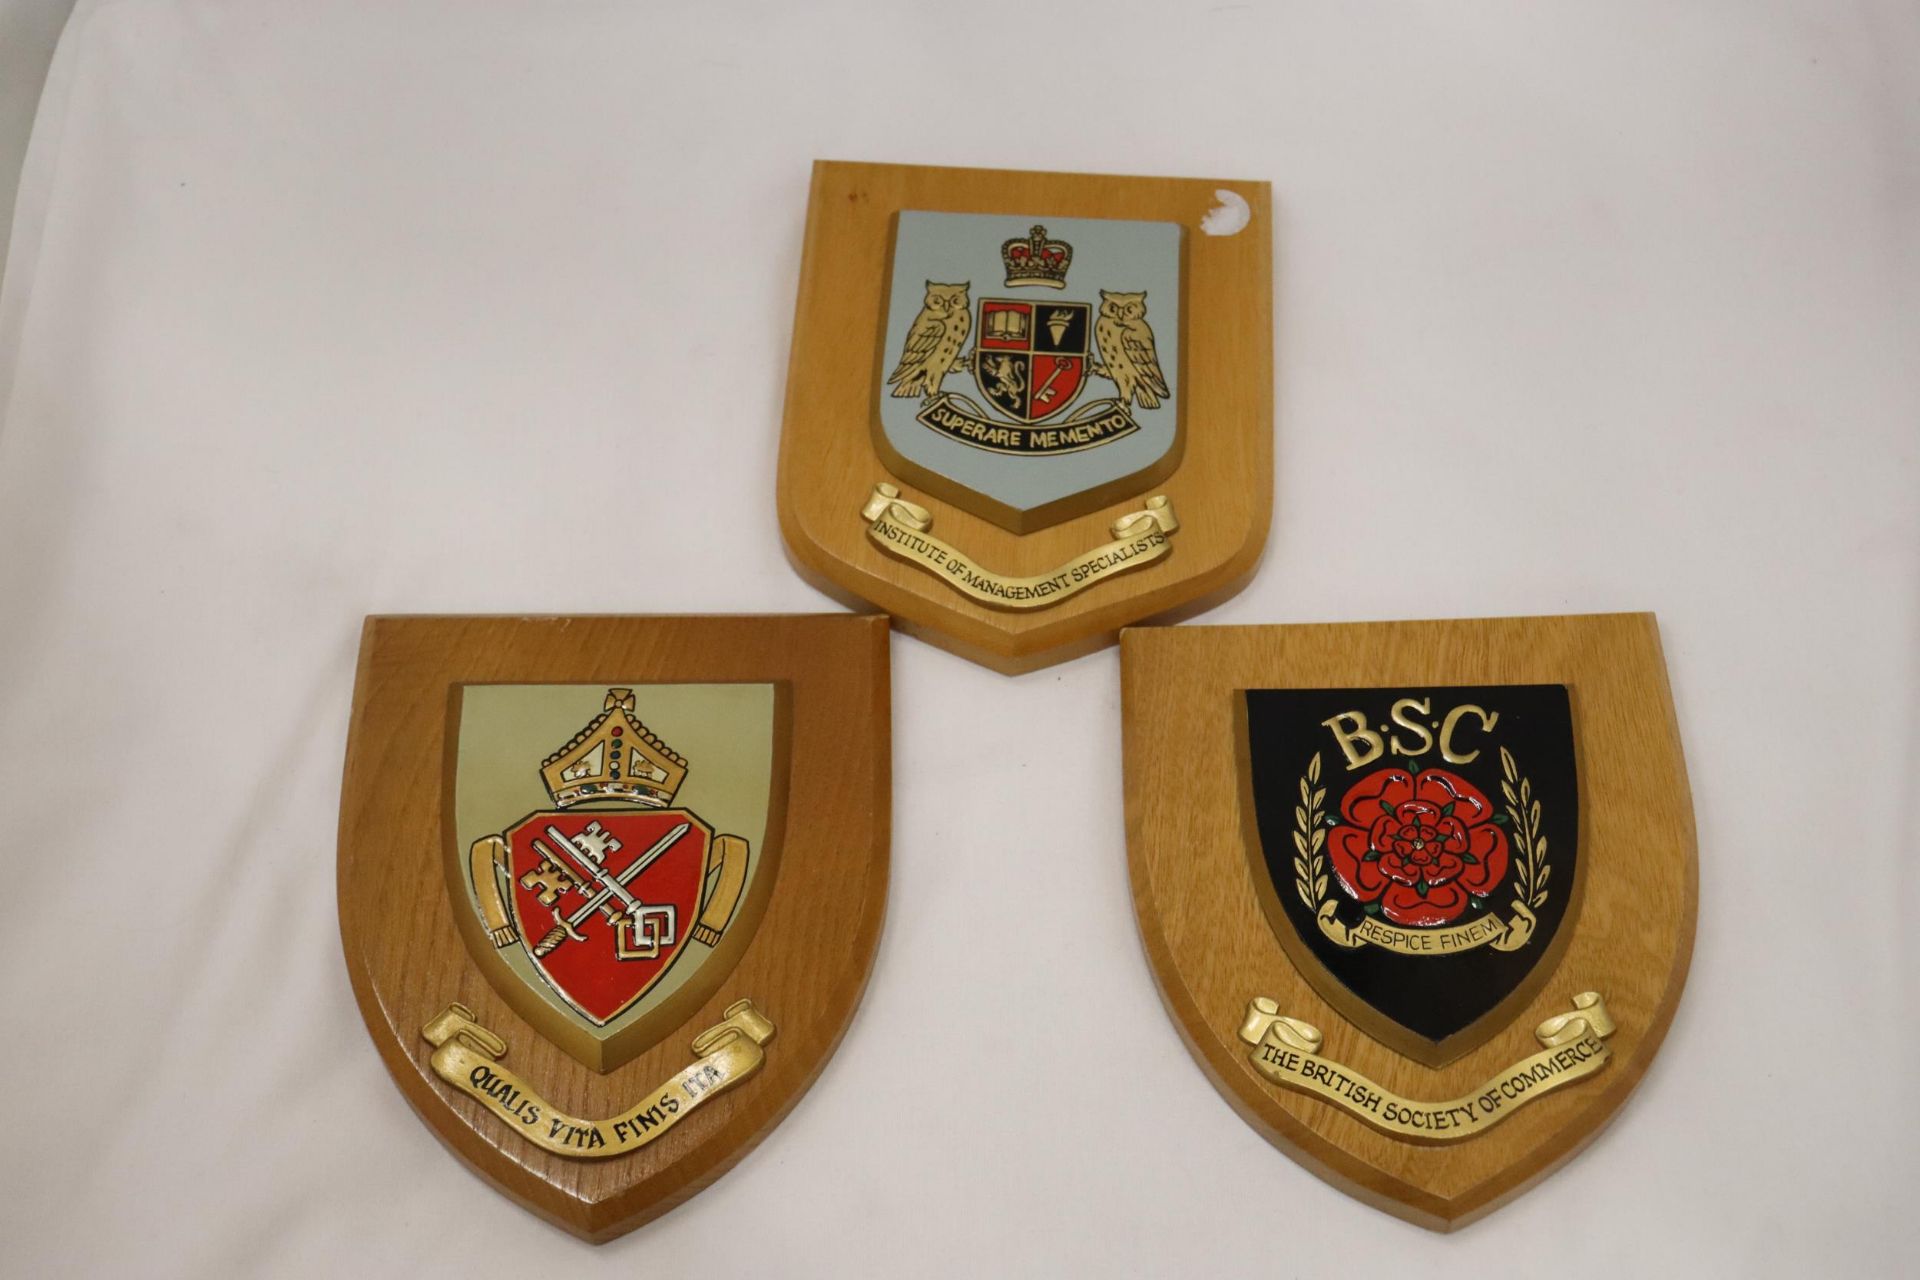 THREE BUSINESS/INDUSTRY WOODEN PLAQUES